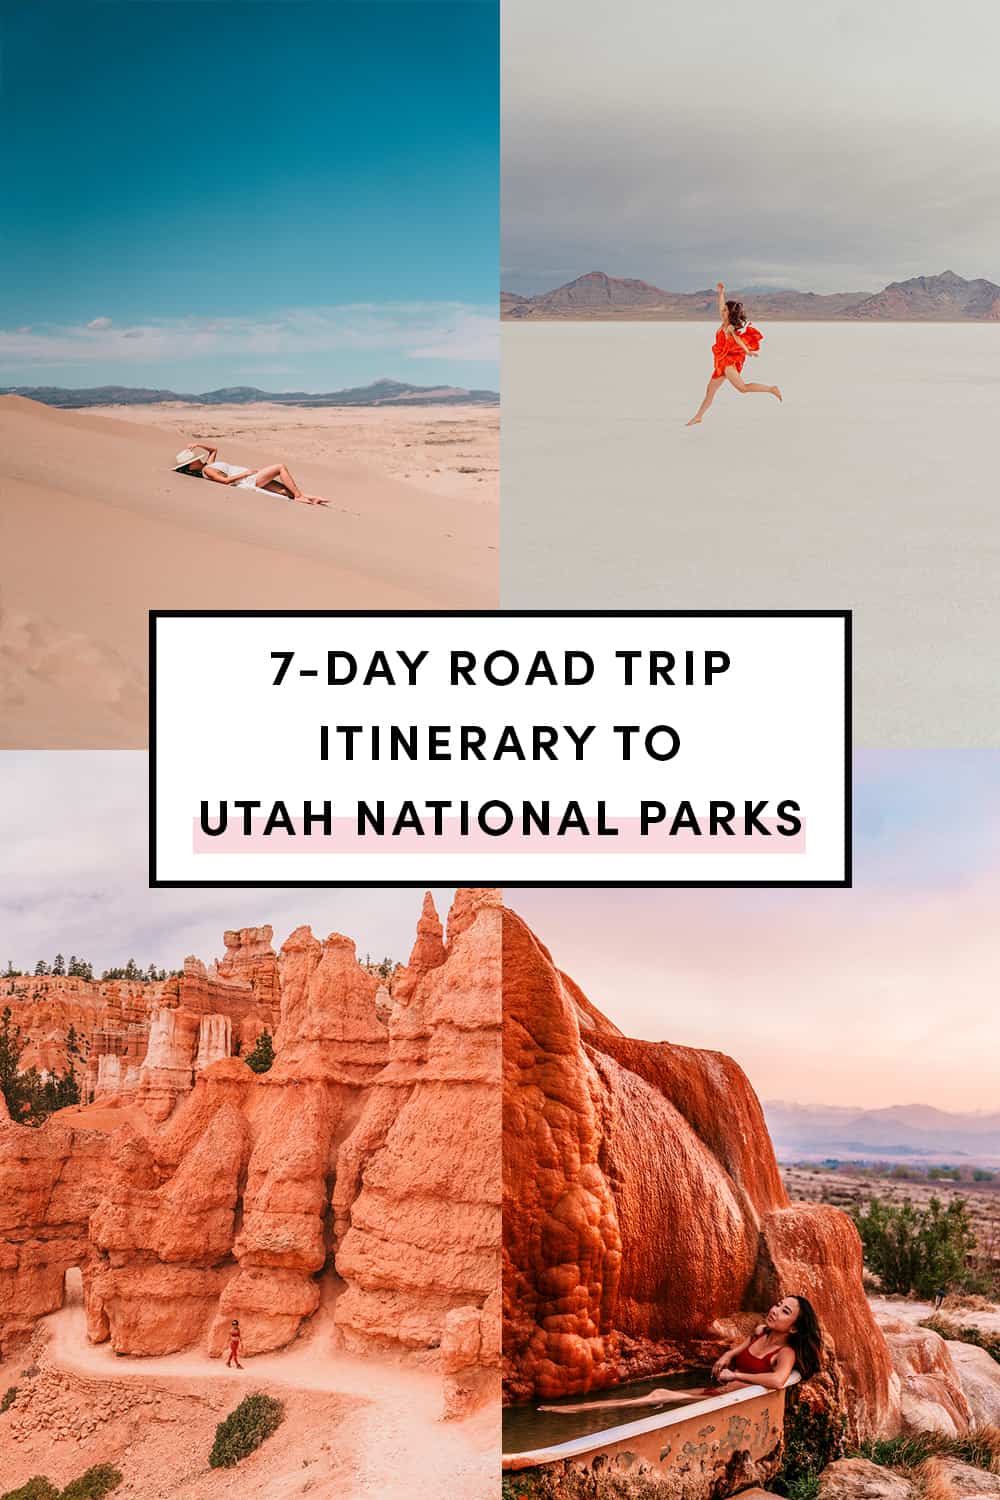 7-Day Road Trip Itinerary To Utah National Parks | Zion | Bryce Canyon | Little Saharas